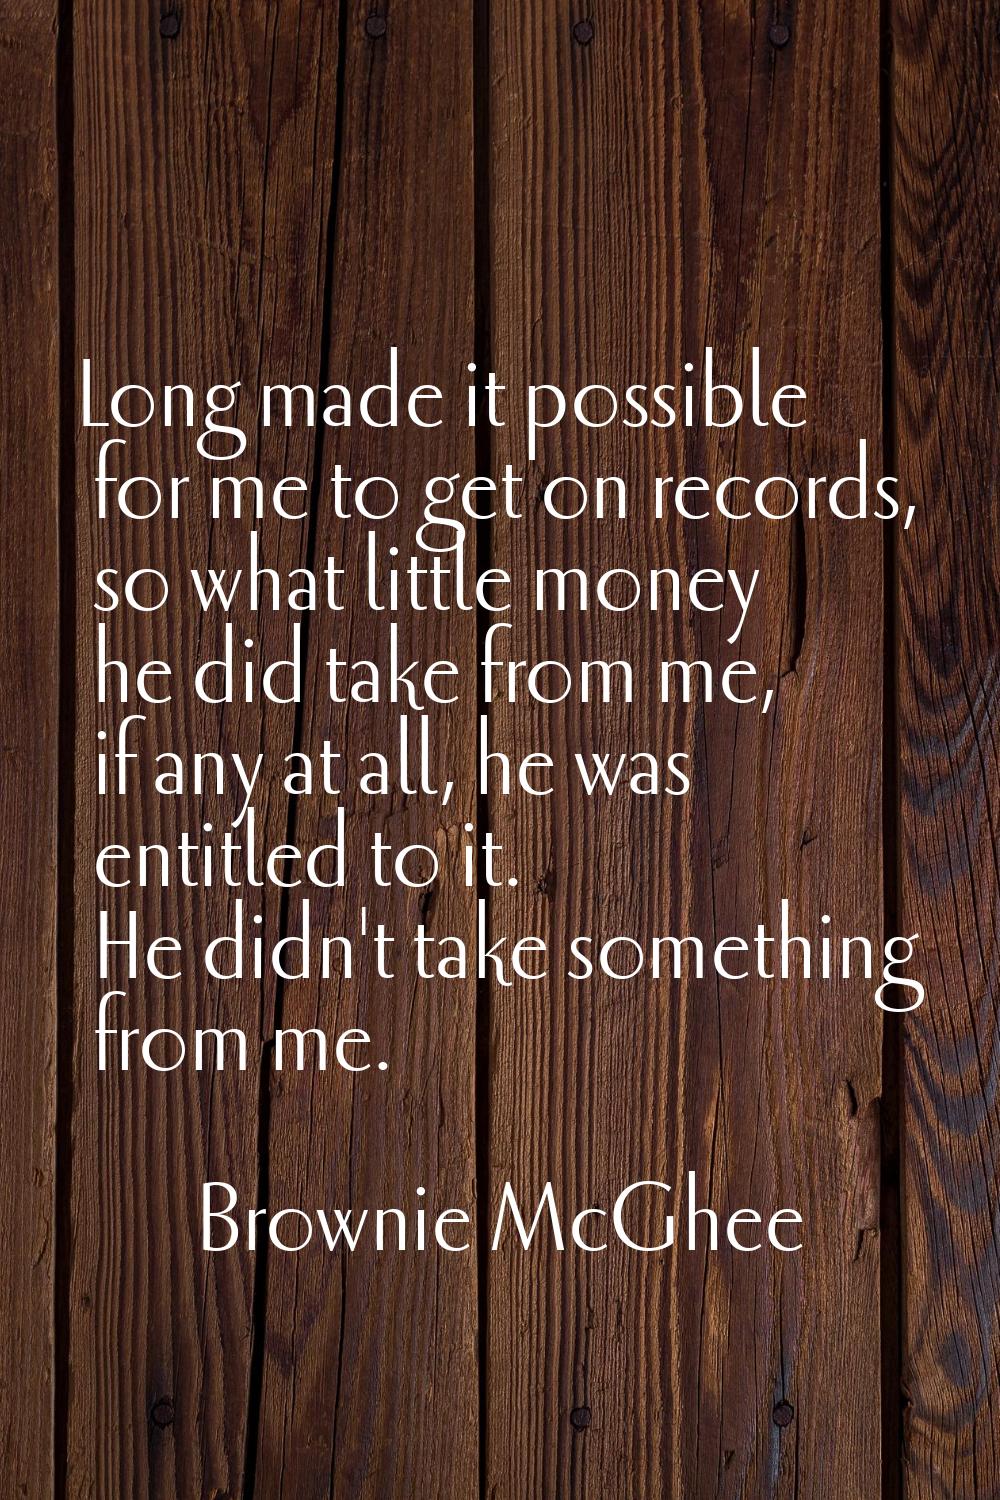 Long made it possible for me to get on records, so what little money he did take from me, if any at